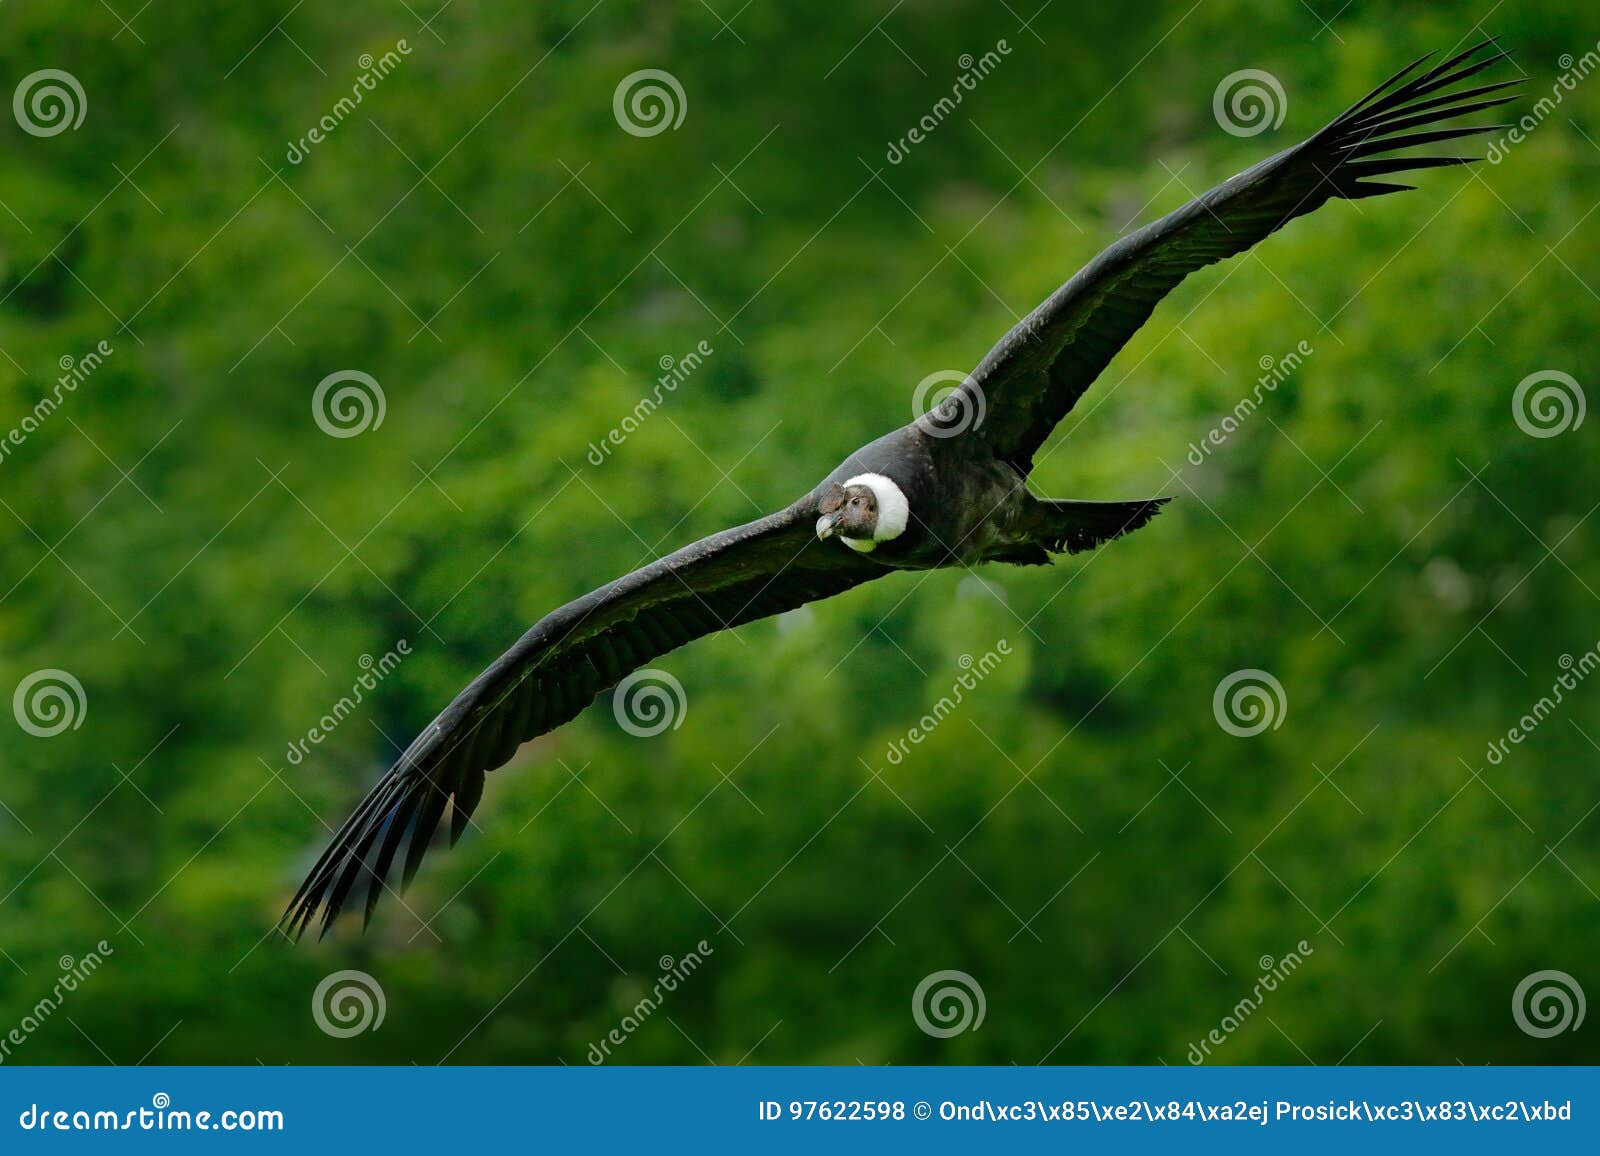 andean condor, vultur gryphus, big birds of prey flying above the mountain. vulture in the stone. bird in the nature habitat, peru